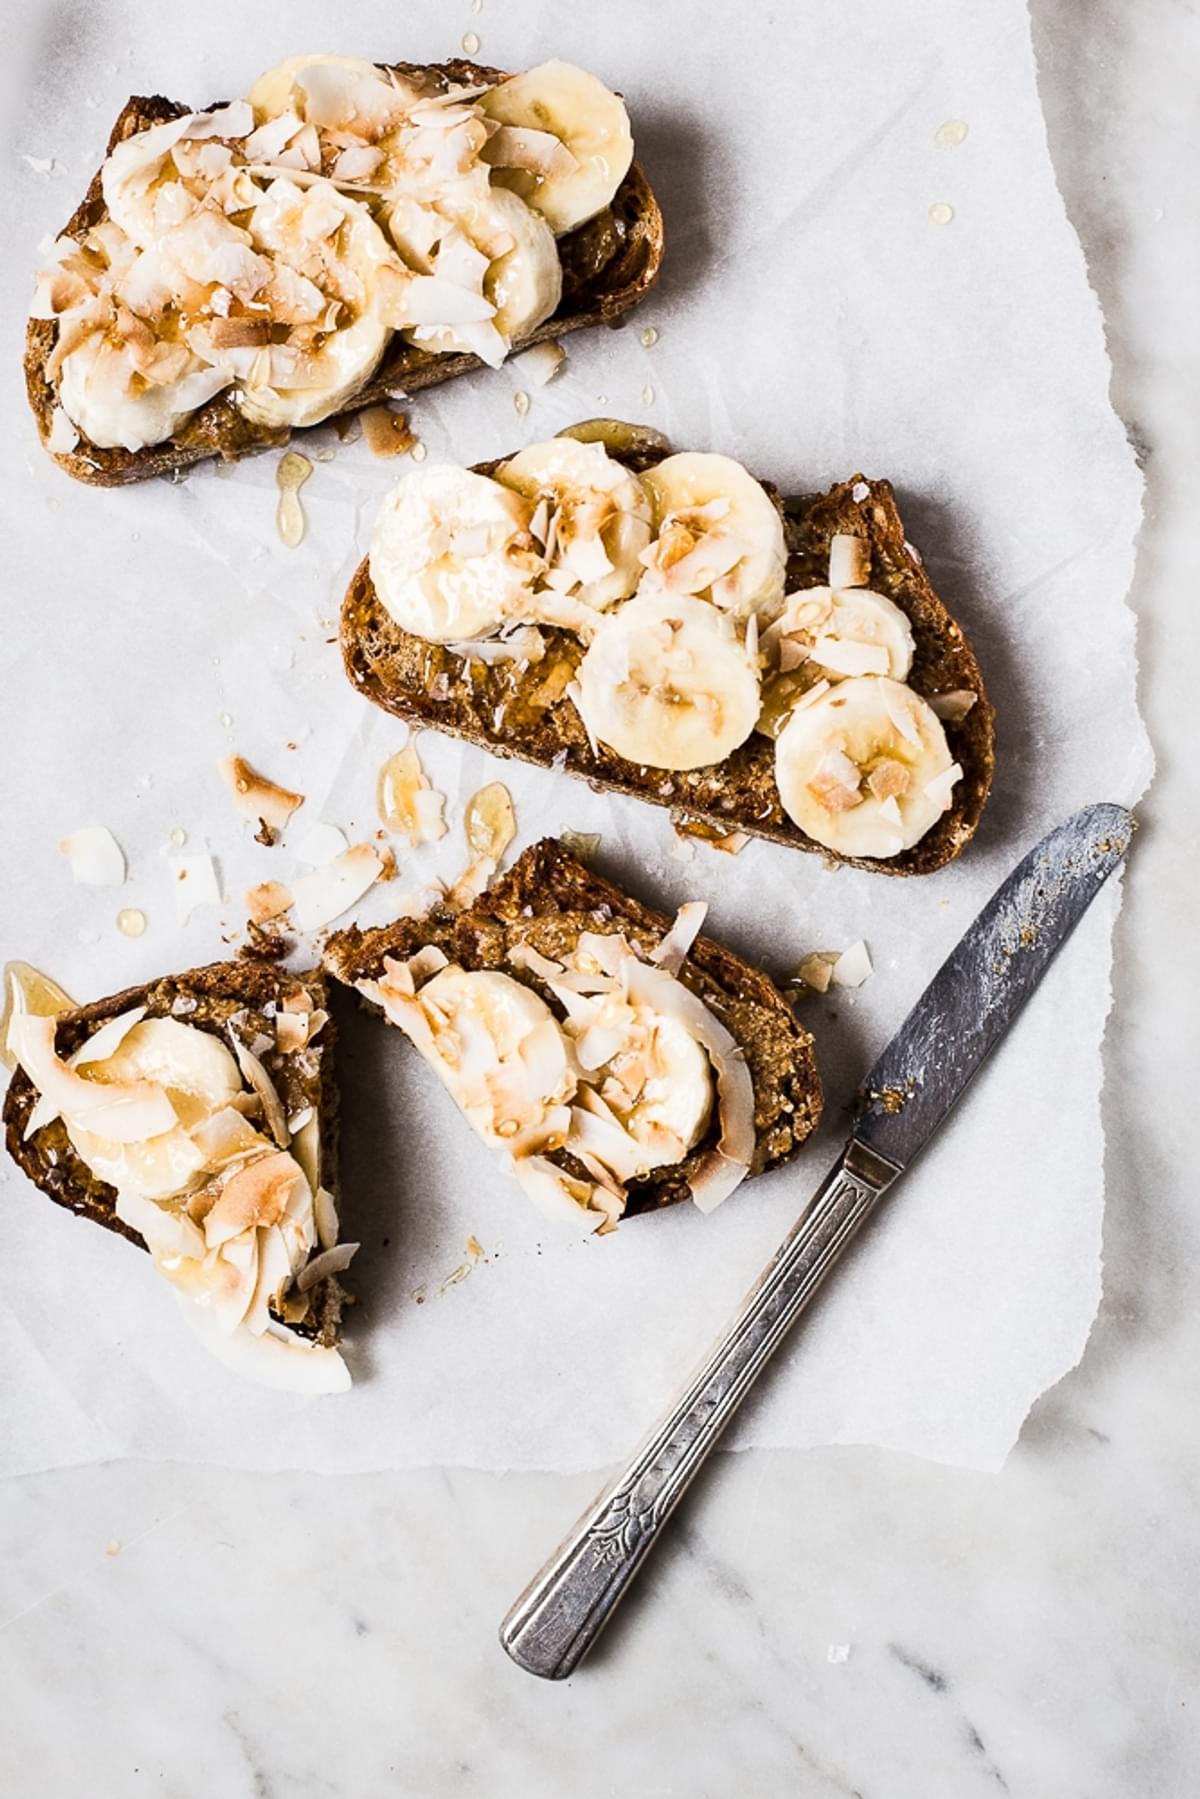 Almond Butter Toast with Bananas, Toasted Coconut, honey and salt on parchment paper